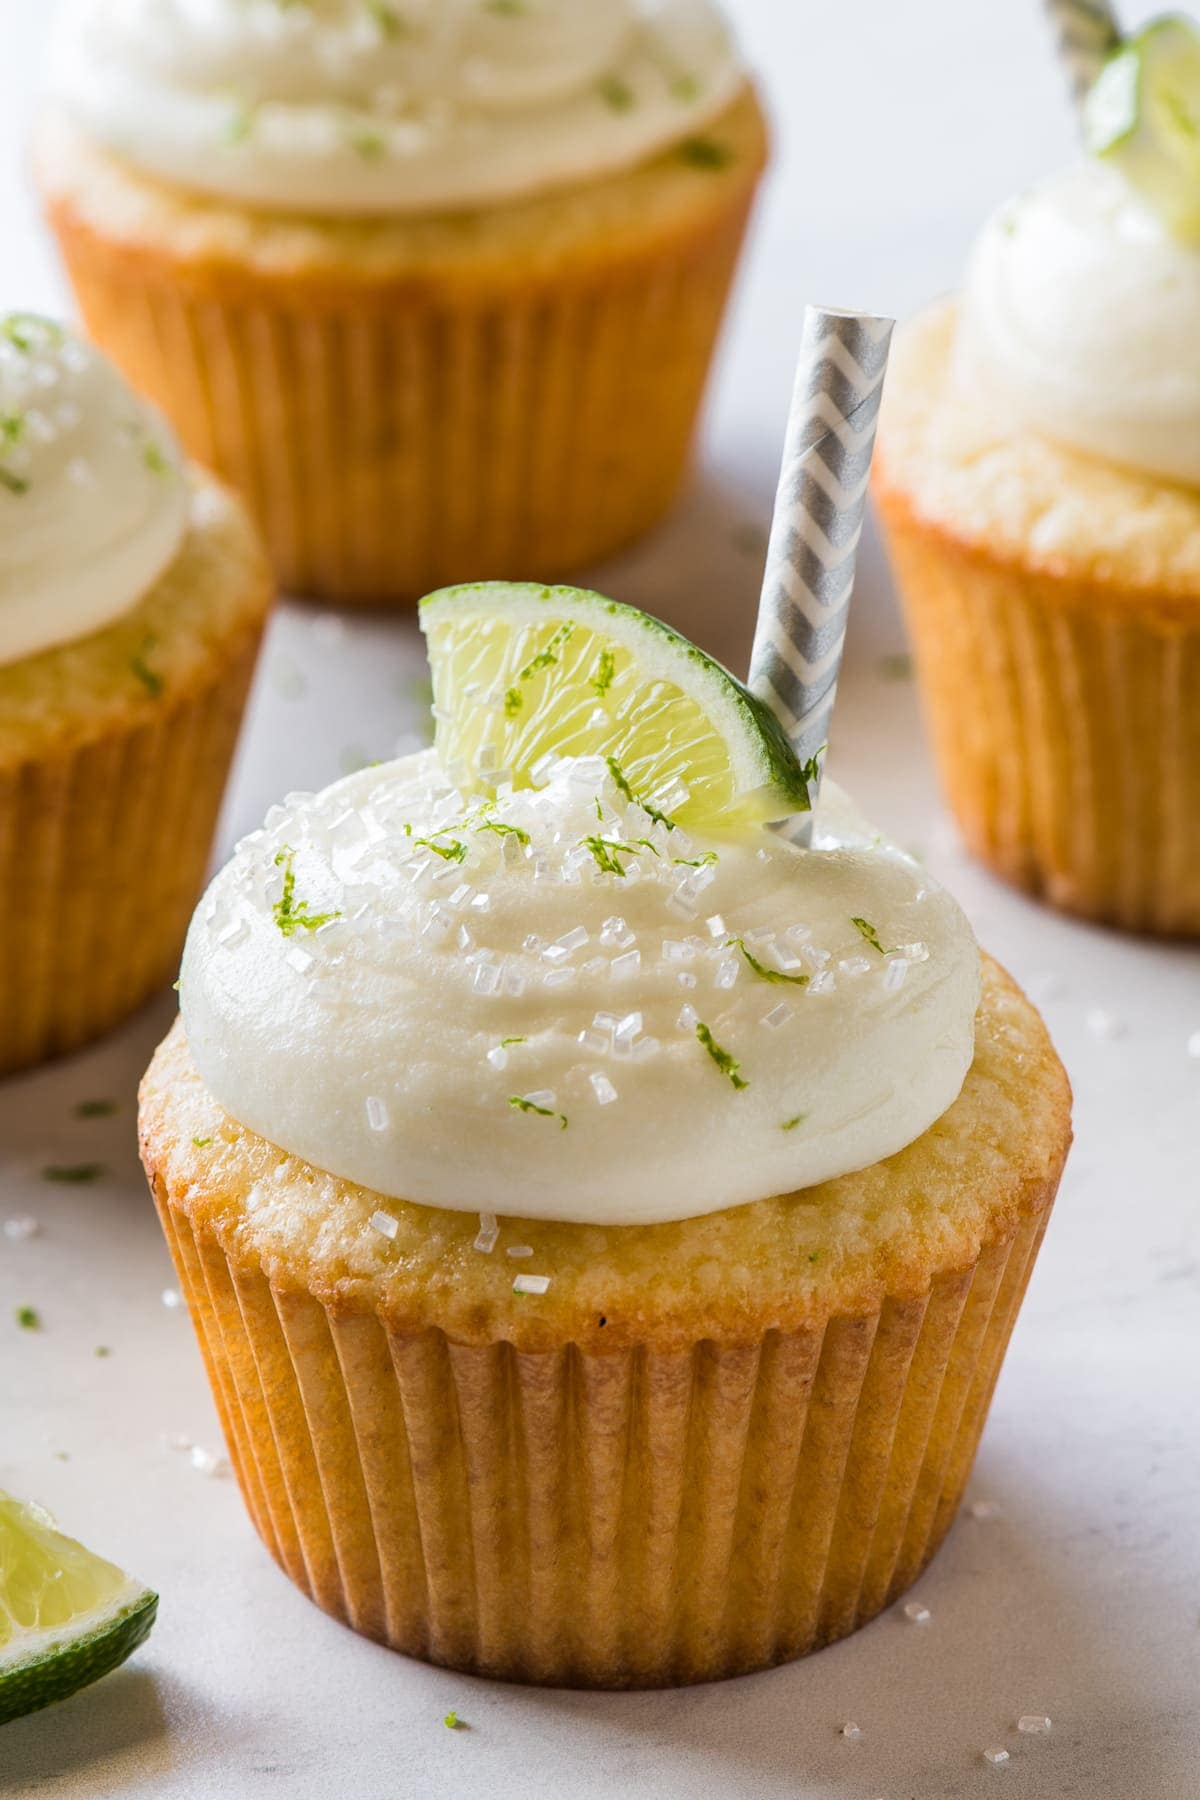 A Margarita Cupcake topped with cream cheese frosting, lime zest, and sprinkles.